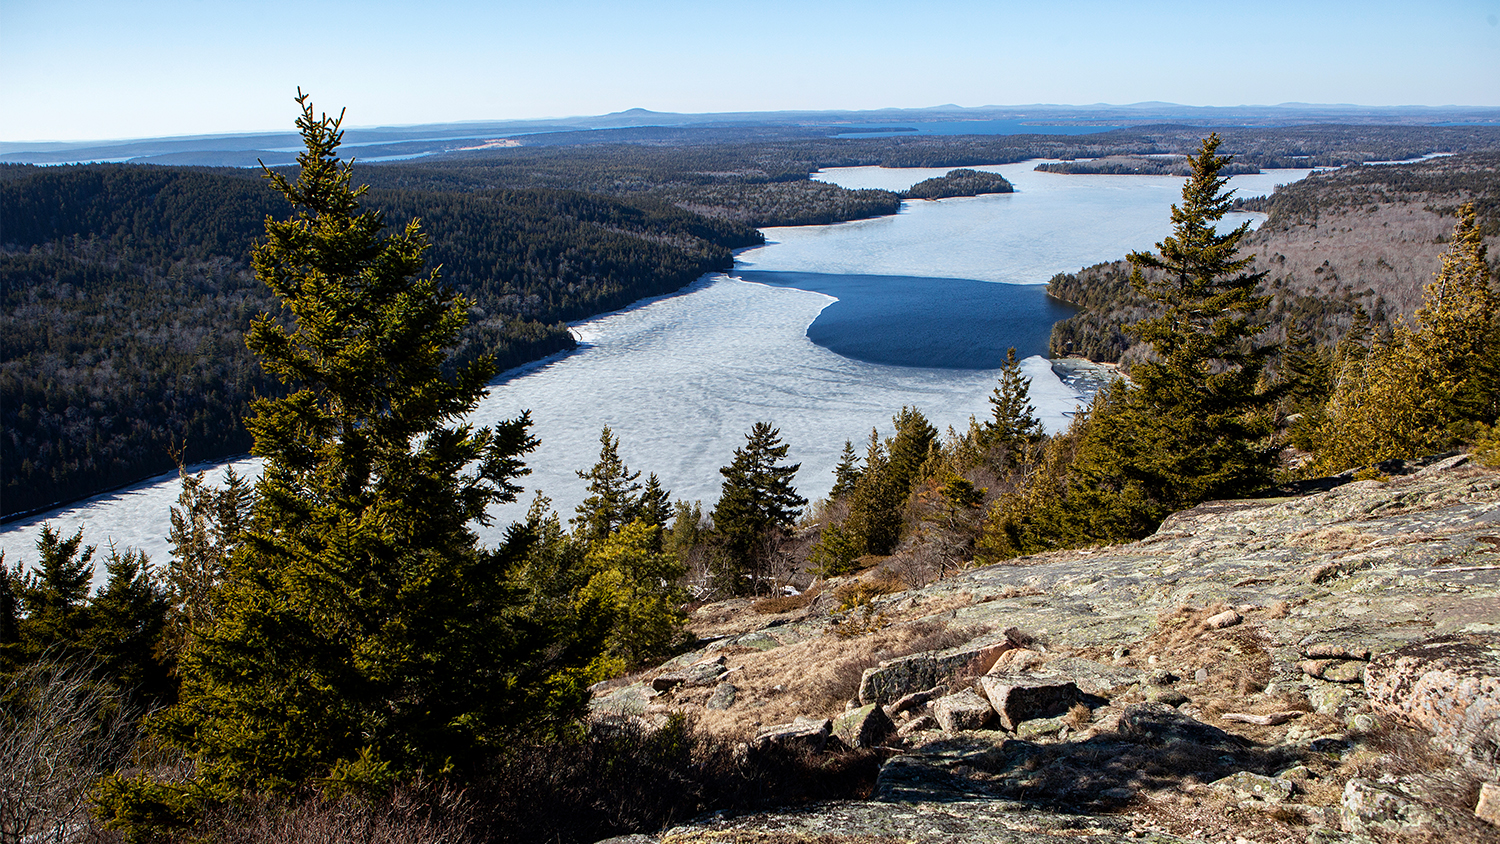 Learn more About Acadia’s New Approach to Managing Impacts of Climate Change